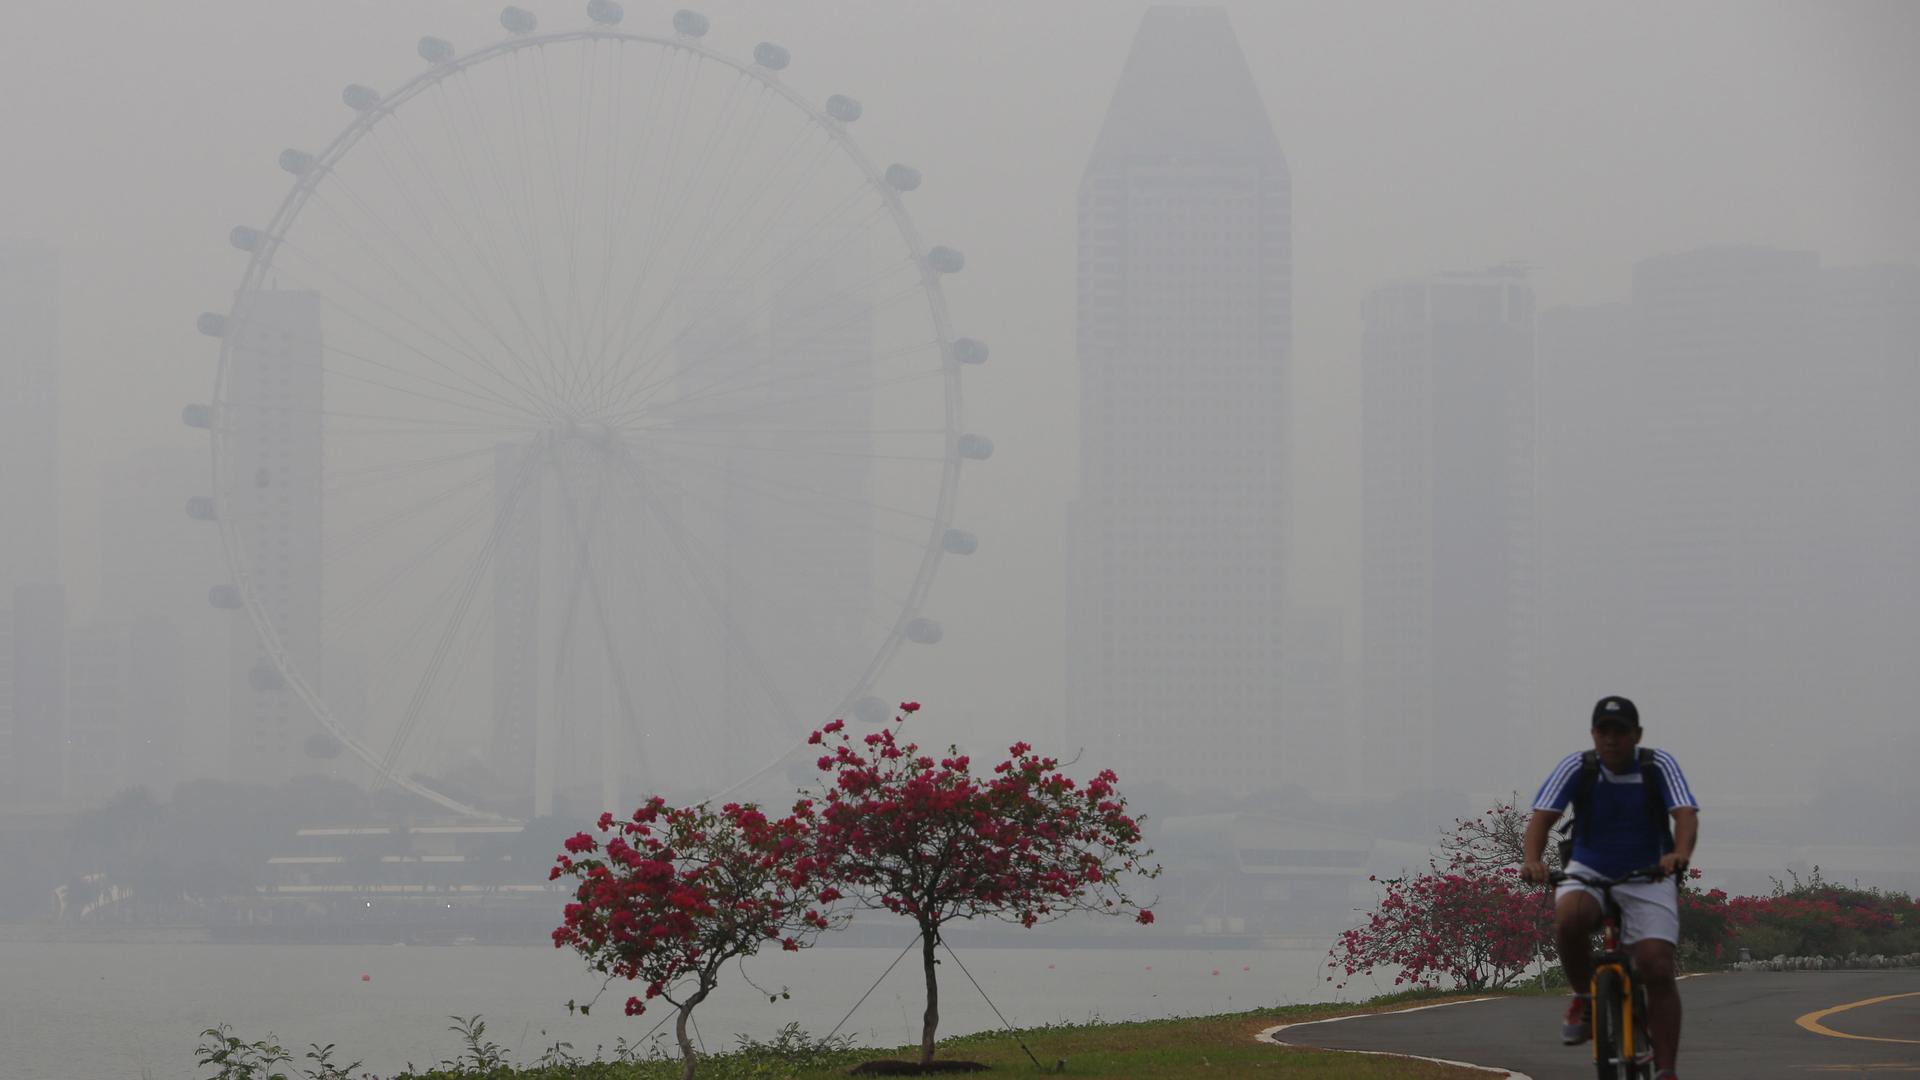 A man rides his bicycle past the Singapore Flyer observatory wheel shrouded by haze, in Singapore.